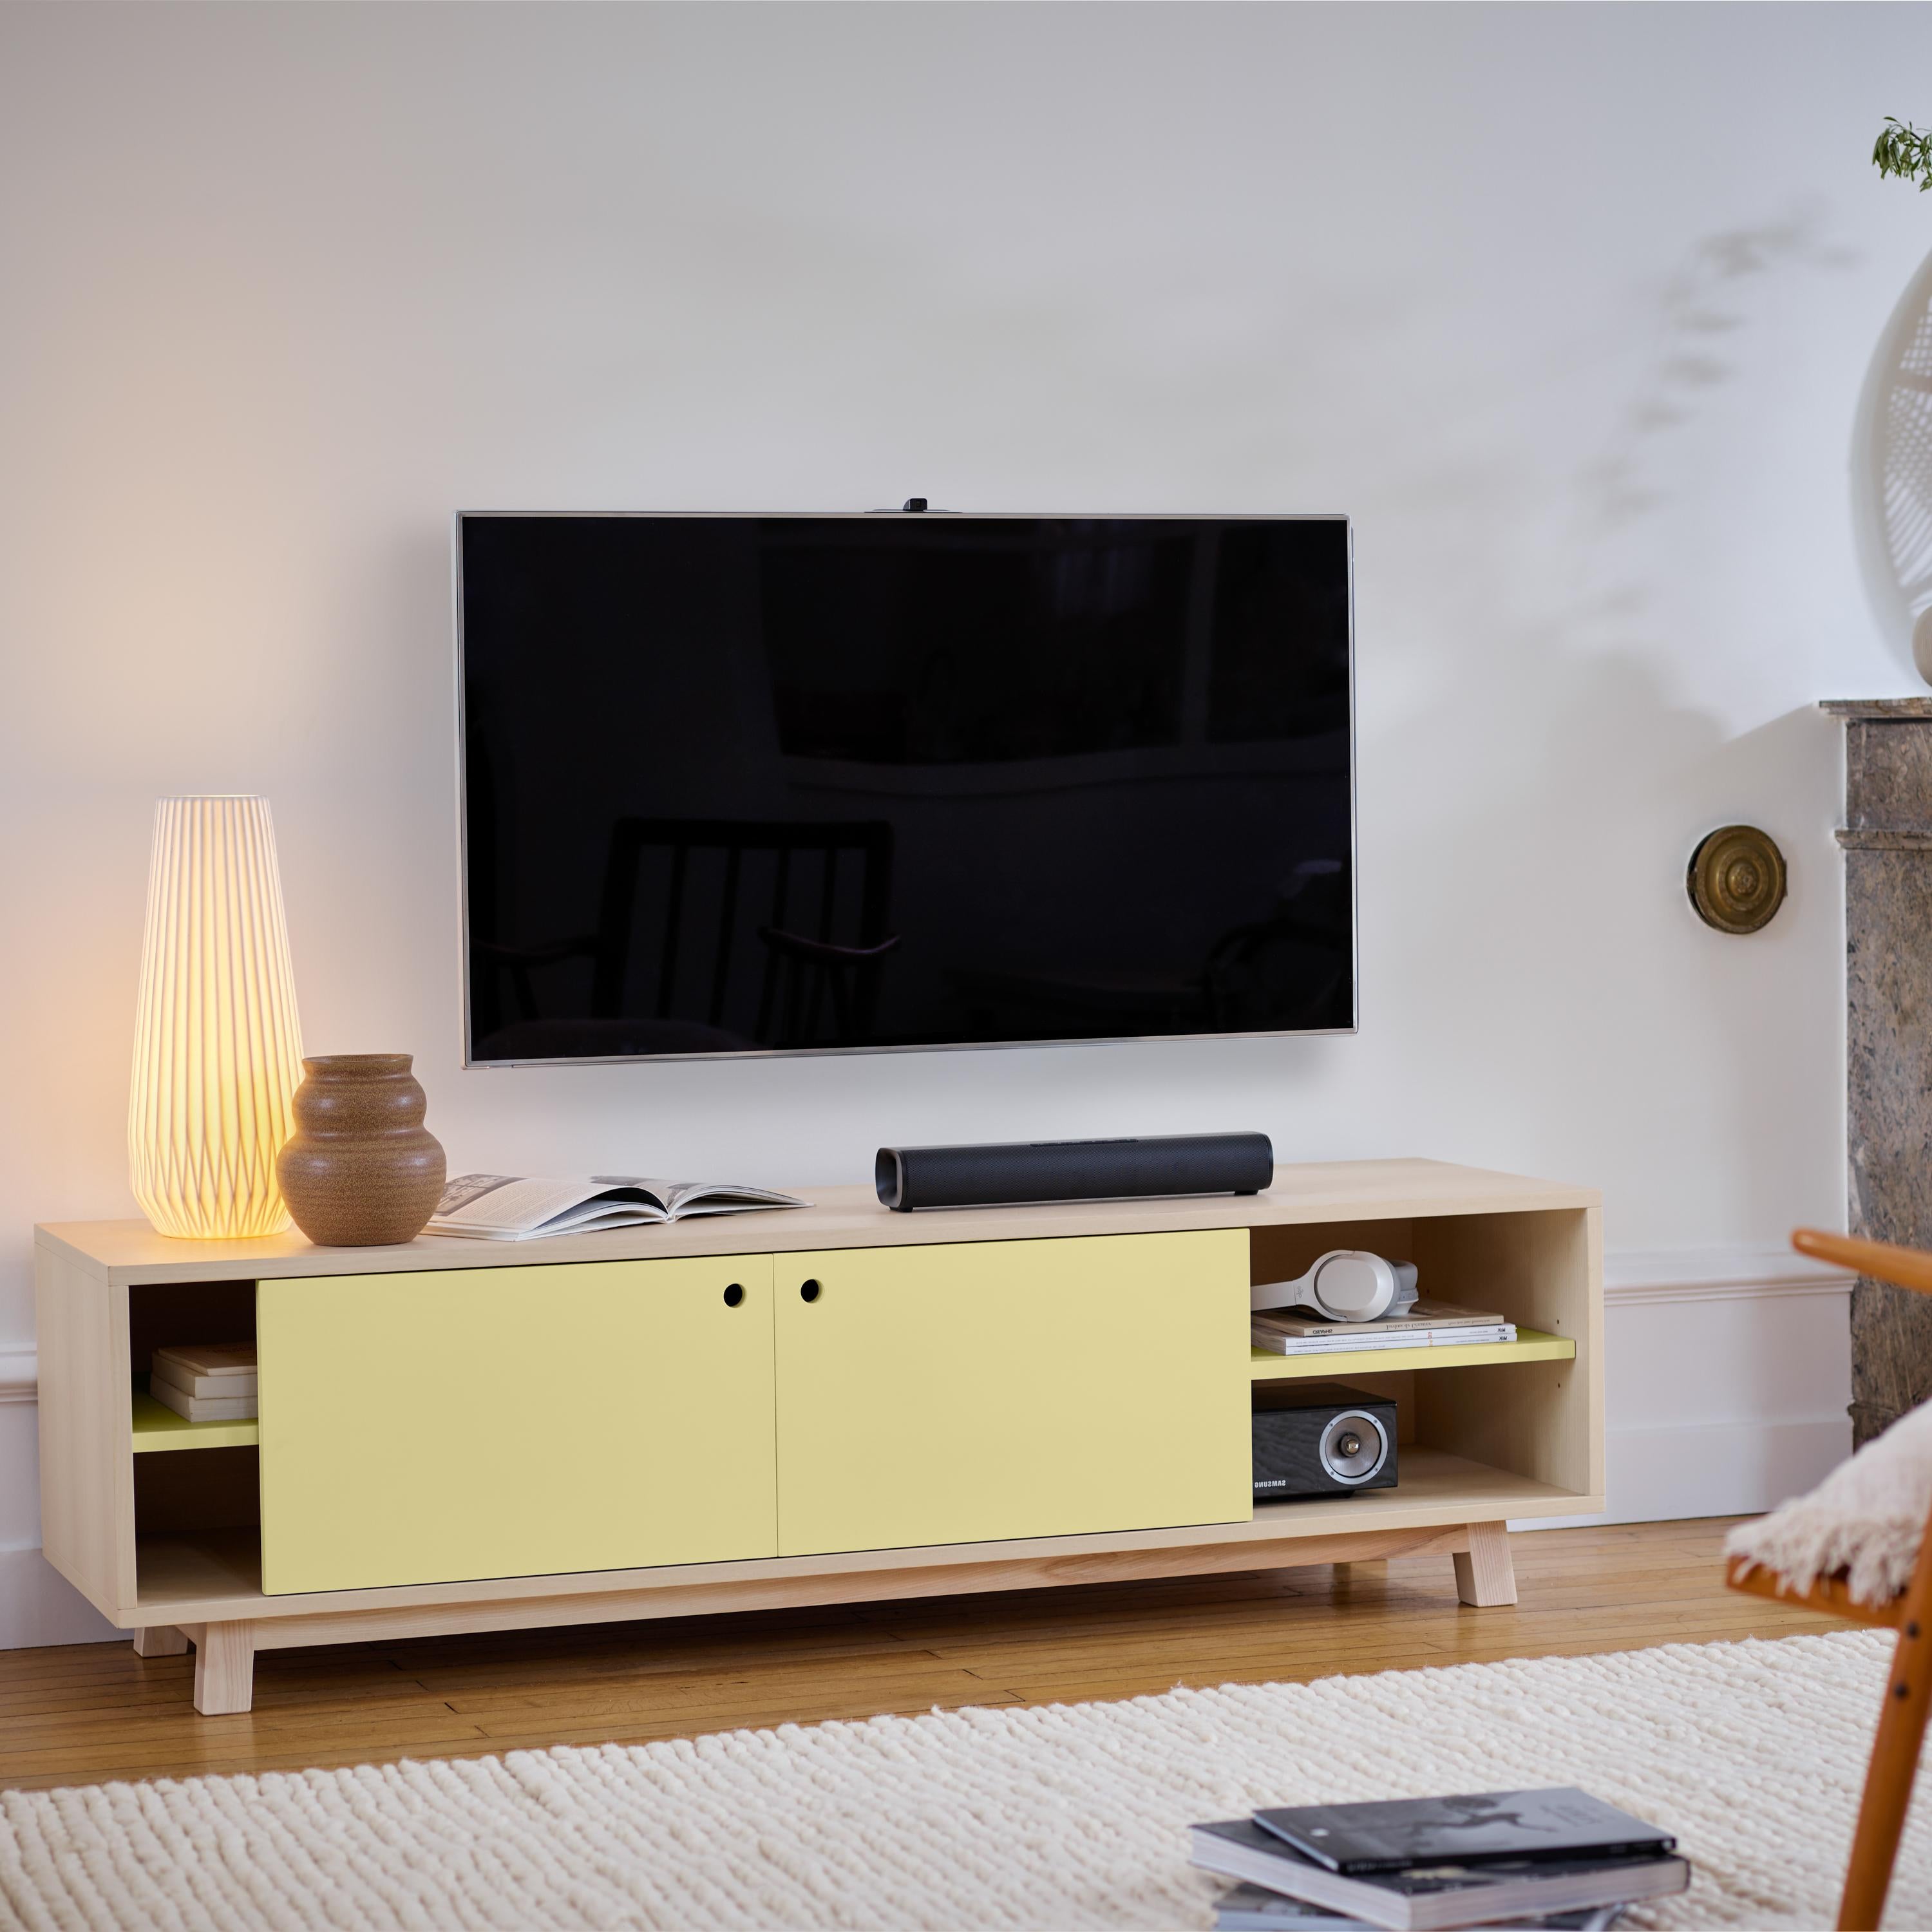 This TV stand with 2 sliding doors is designed by Eric Gizard - Paris.

It is 100% made in France with solid and veneer ash and lacquered MDF doors. 

To pull the door, use the round eyelet. 
2 adjustable wooden shelves on cleats are placed behind